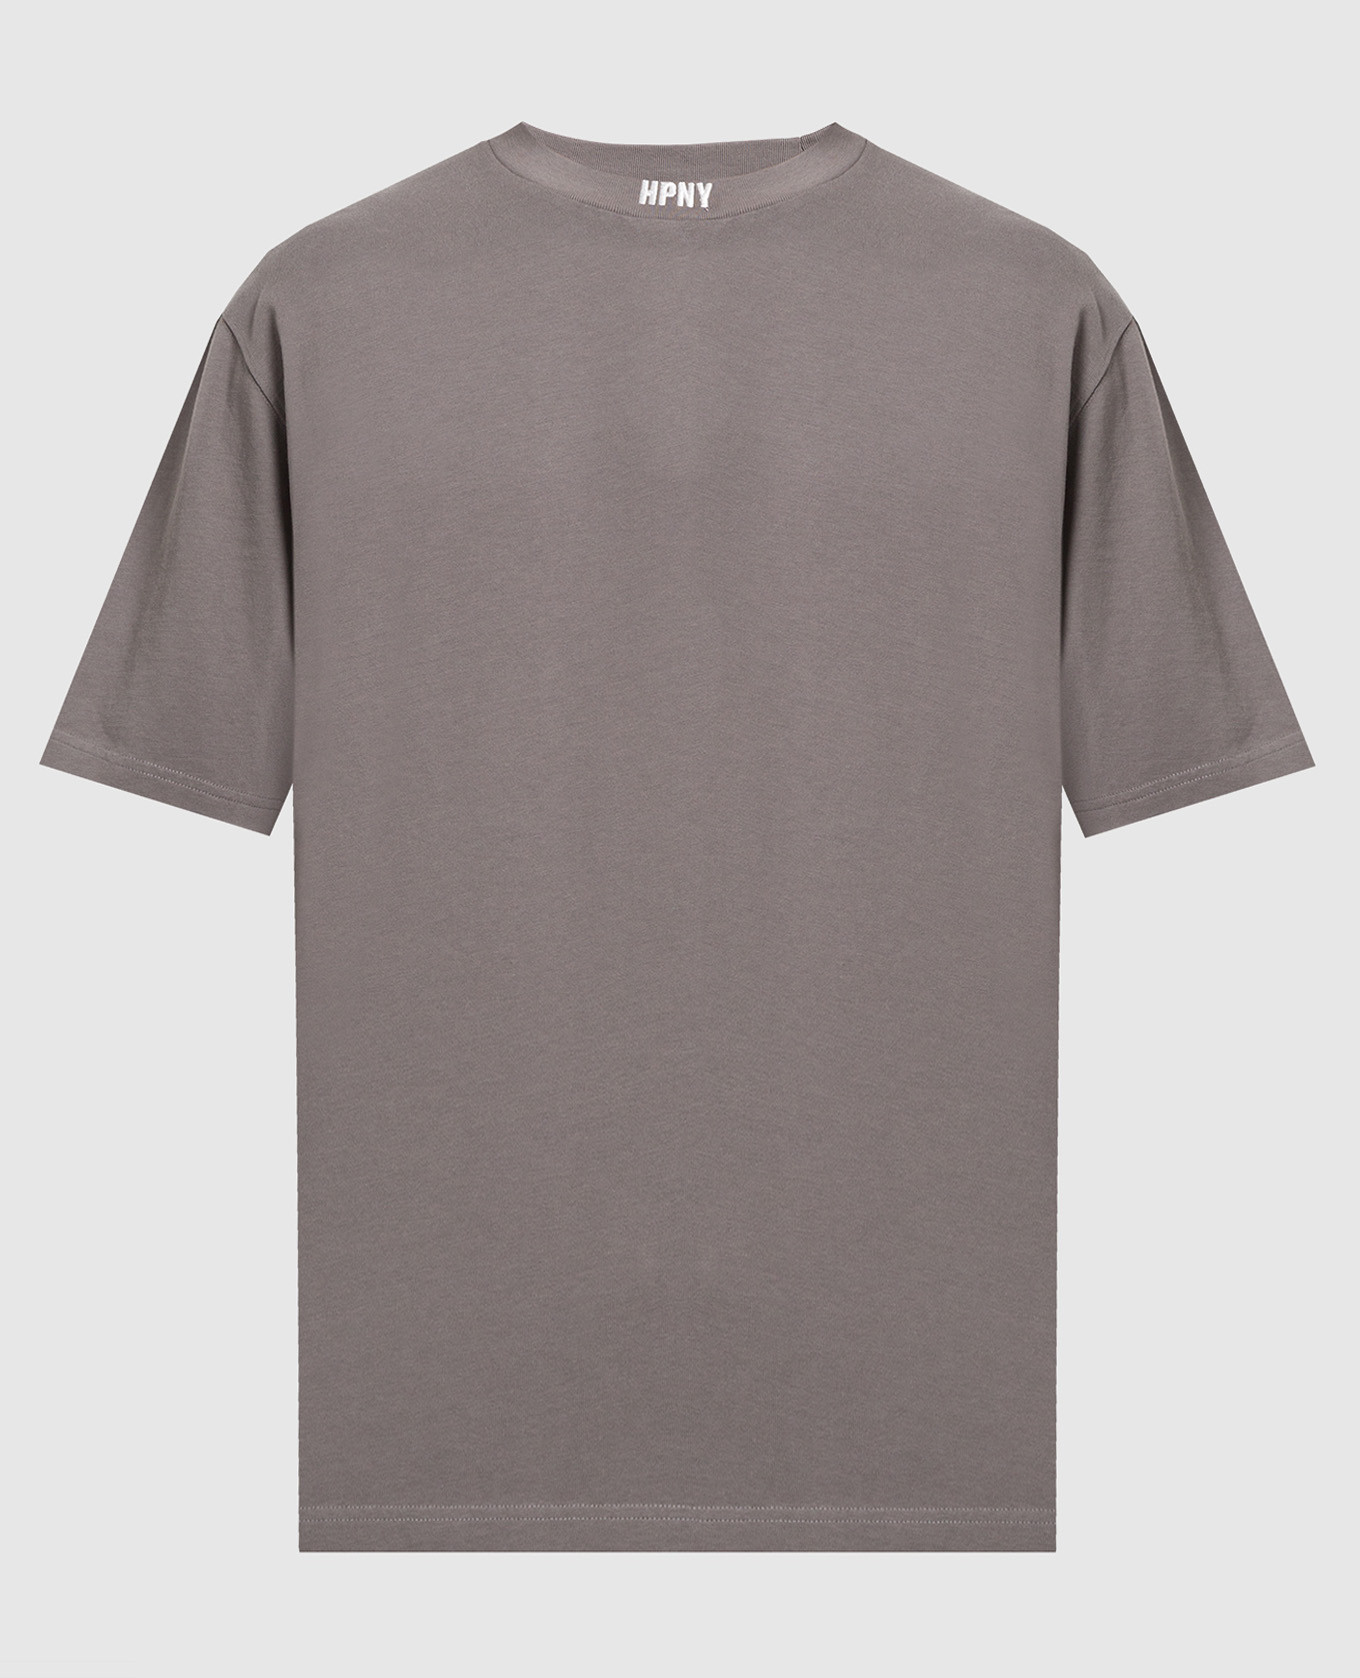 Gray t-shirt with HPNY logo embroidery